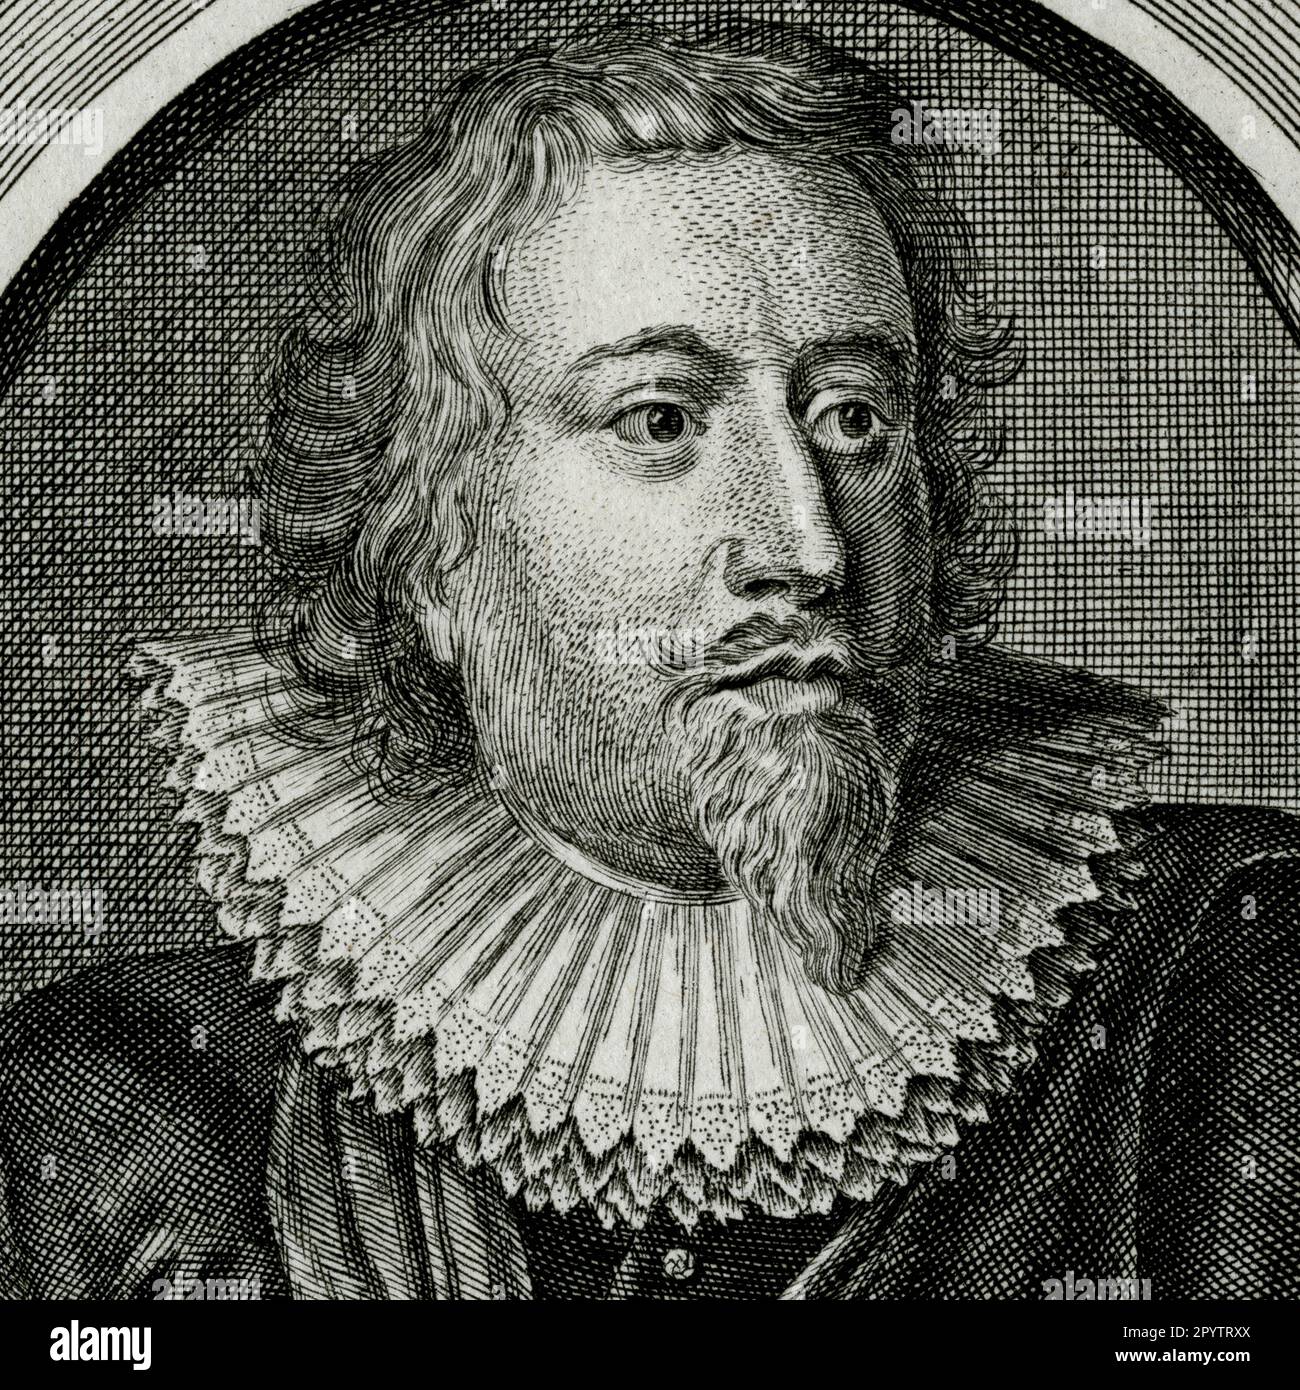 Richard Weston (1577-1635), 1st Earl of Portland, Chancellor of the Exchequer under two Stuart kings, James I of England and VI of Scotland and Charles I. Square detail of engraving created in the 1700s by George Vertue (1683-1756), after a portrait by Sir Anthony Van Dyck (1599-1641), and used in the 1740 edition of  'History of the Rebellion and Civil Wars in England' by Edward Hyde (1609-1674), raised to the peerage as 1st Earl of Clarendon. Stock Photo